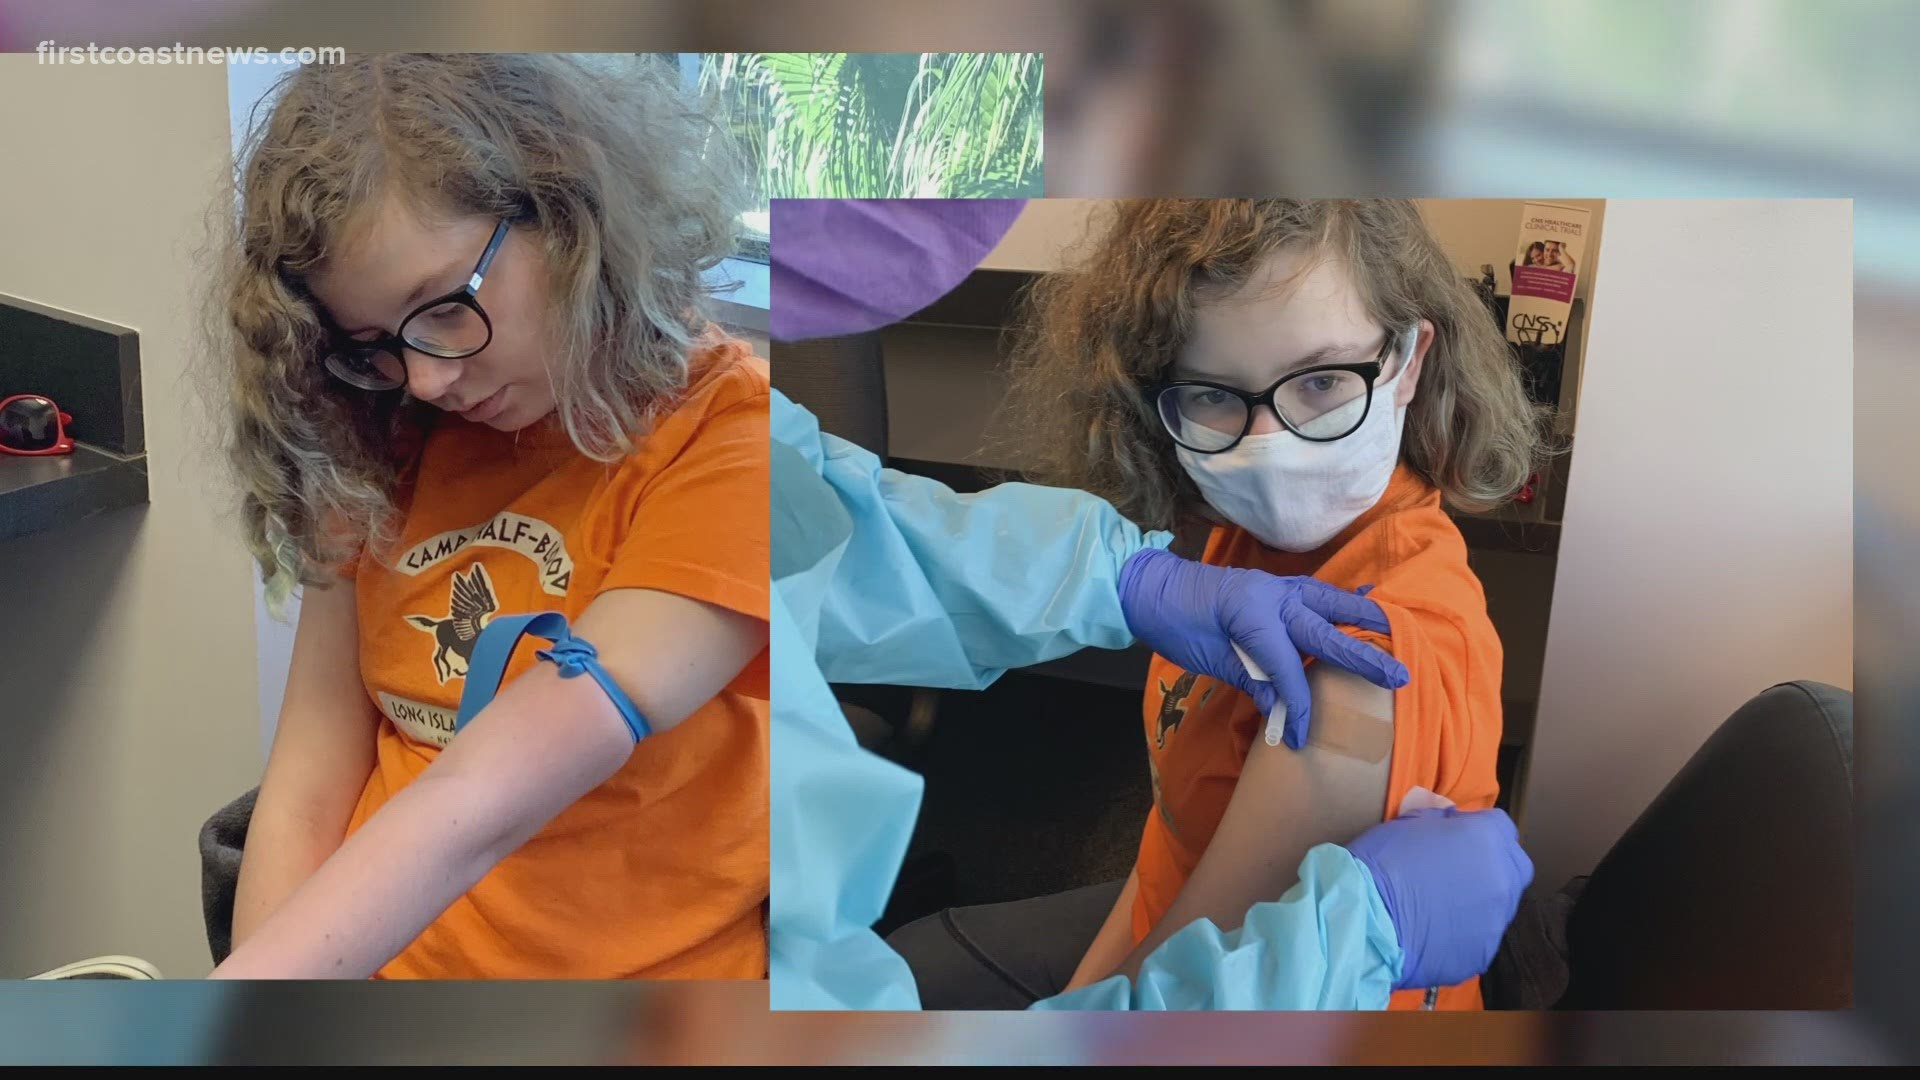 Meredith Anglin received a trial of the COVID-19 vaccine Tuesday. Now, she will play an important role in seeing how the vaccine affects children.